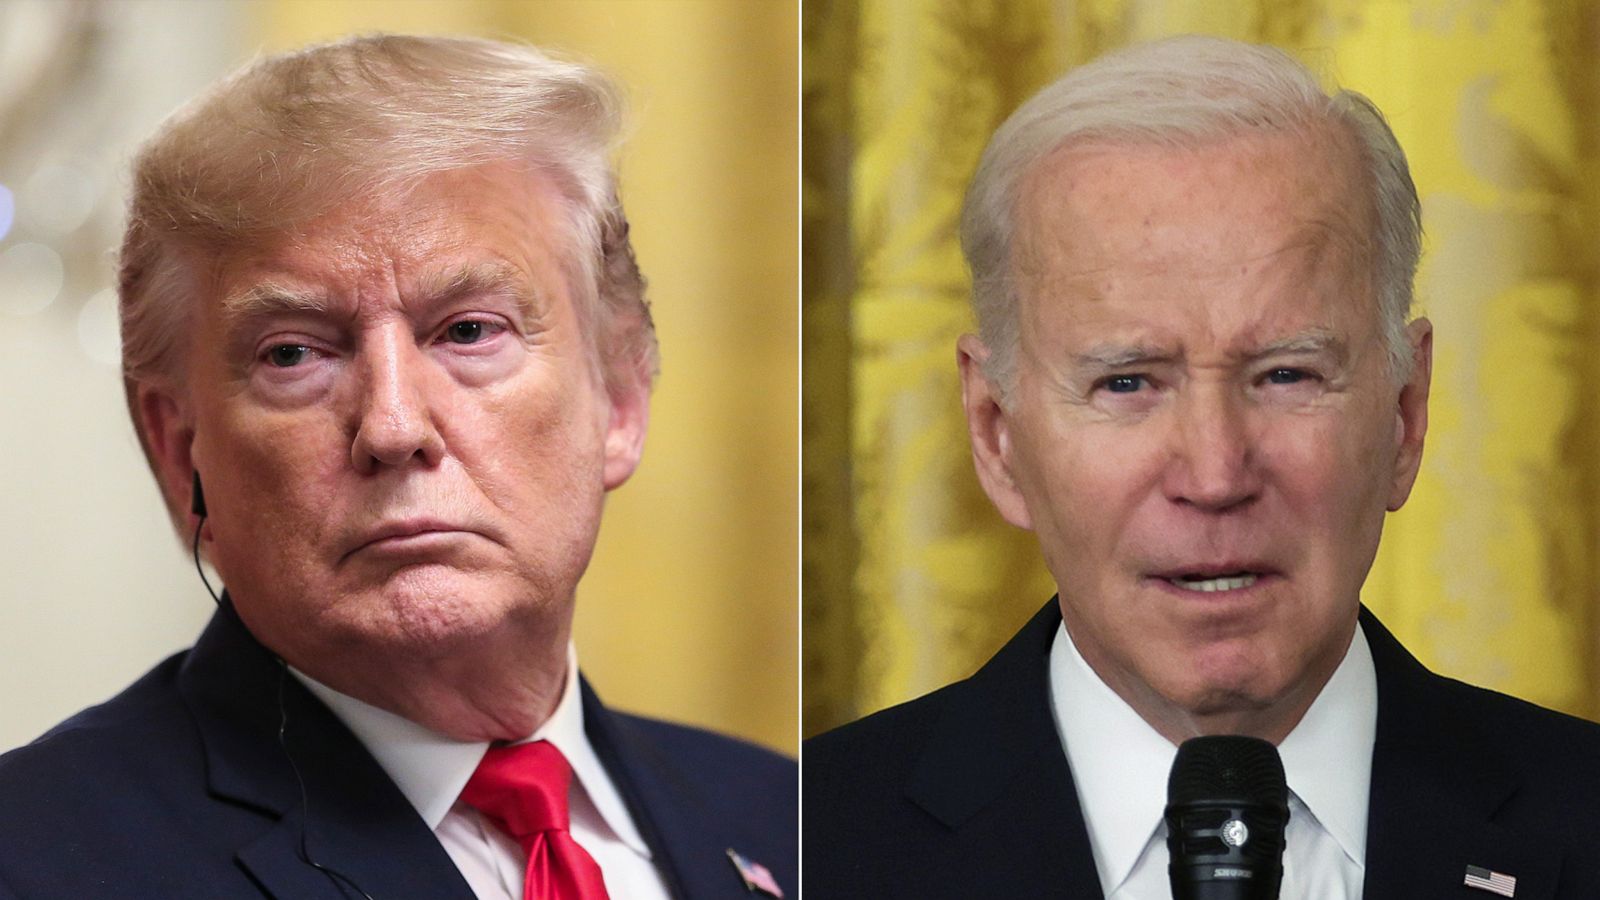 POLL: Most Americans think Biden and inappropriately handled classified documents - ABC